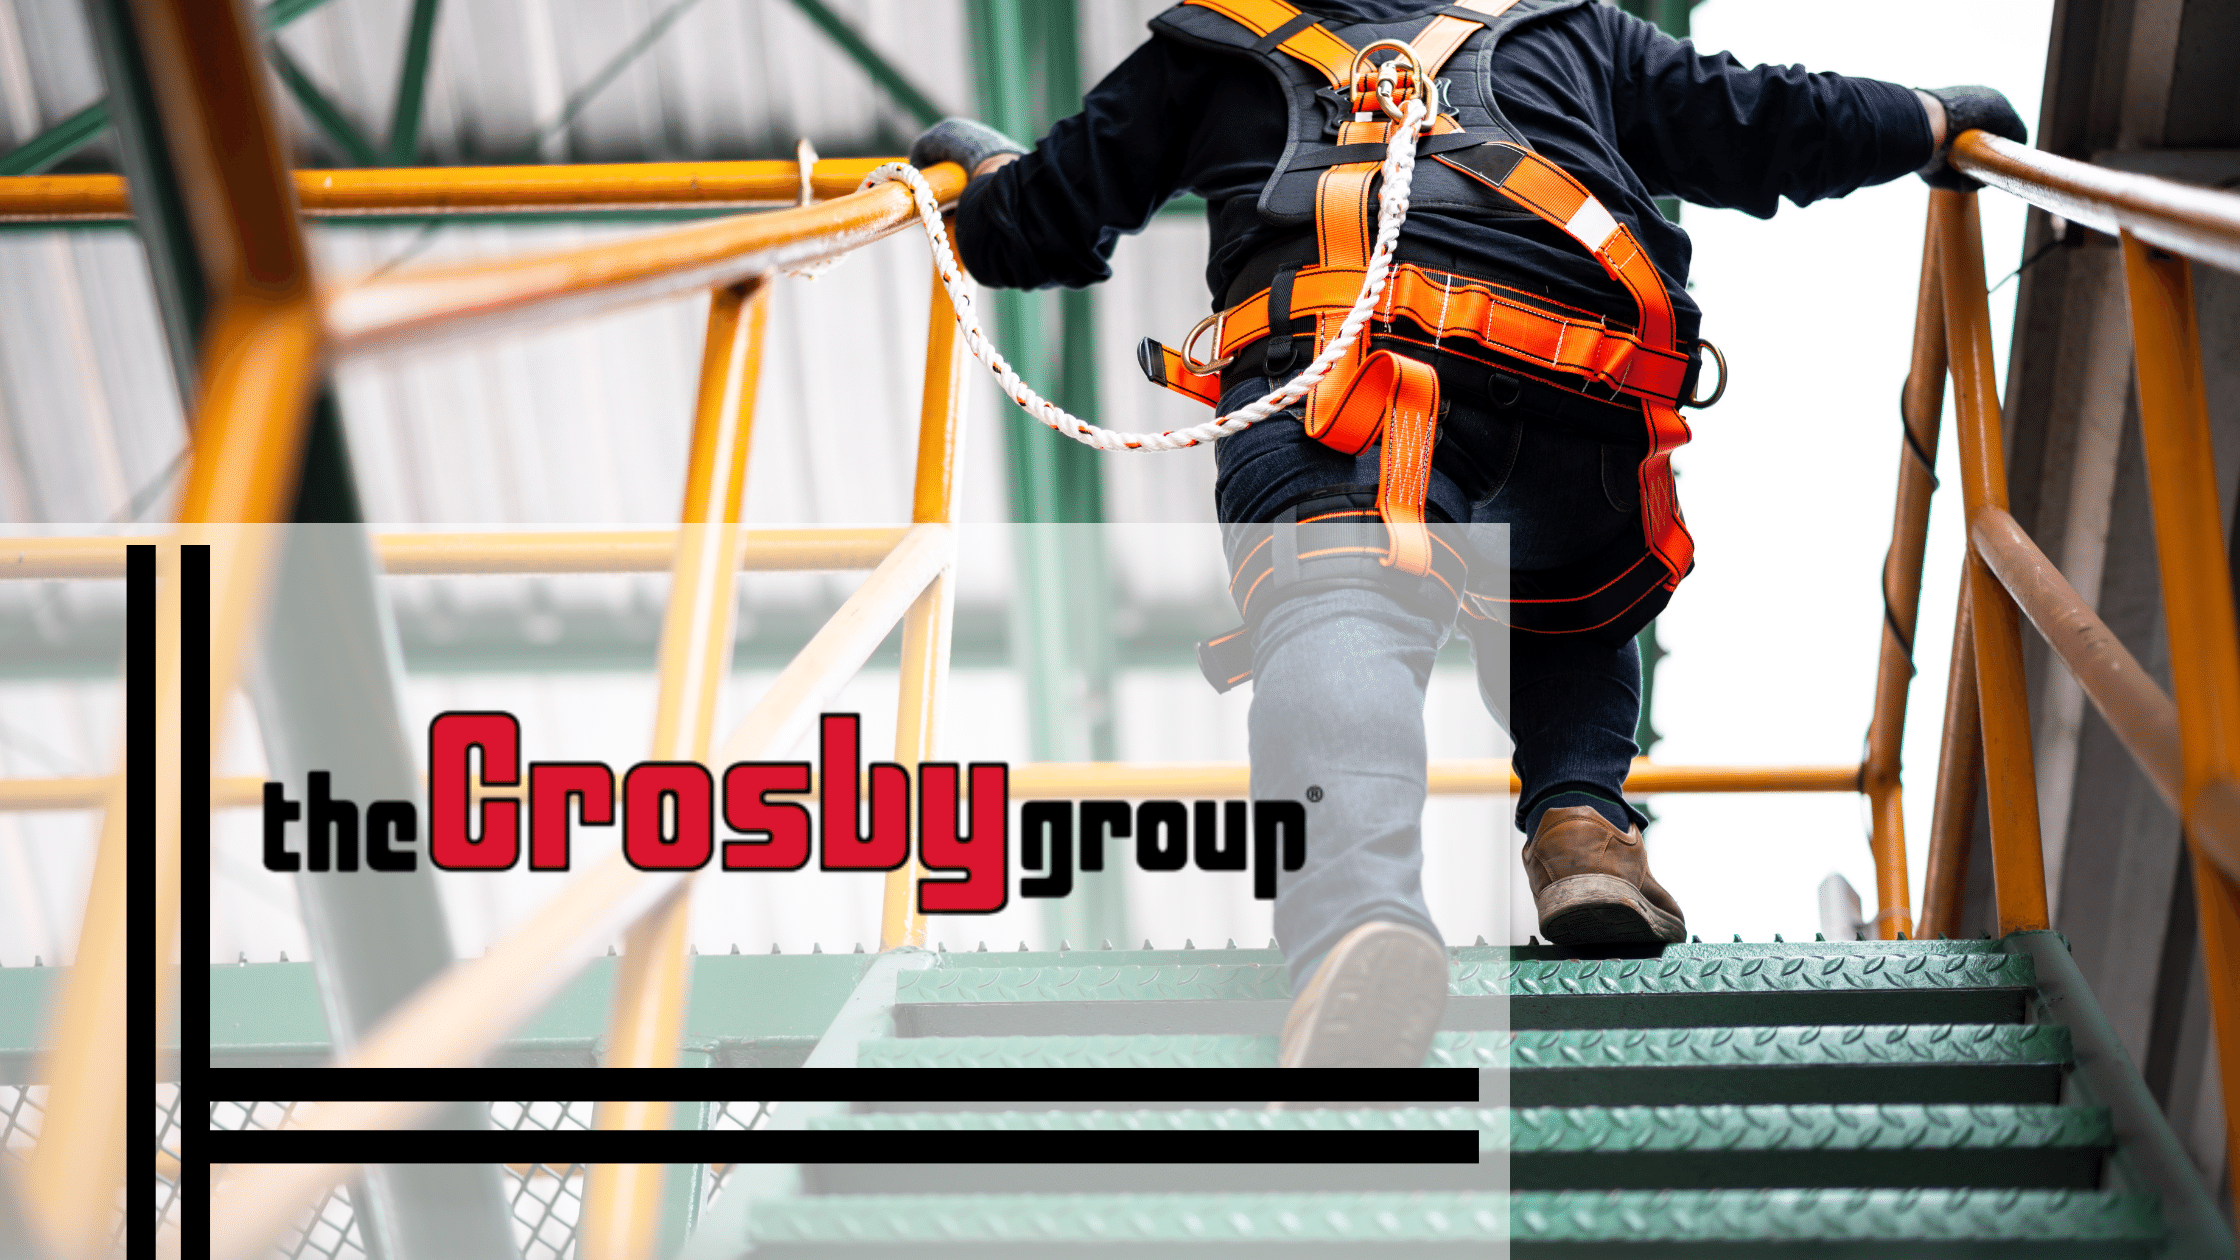 Crosby Group has been trusted for years and is the top manufacturer of rigging, lifting, and material handling products, their training programs reflect this expertise.